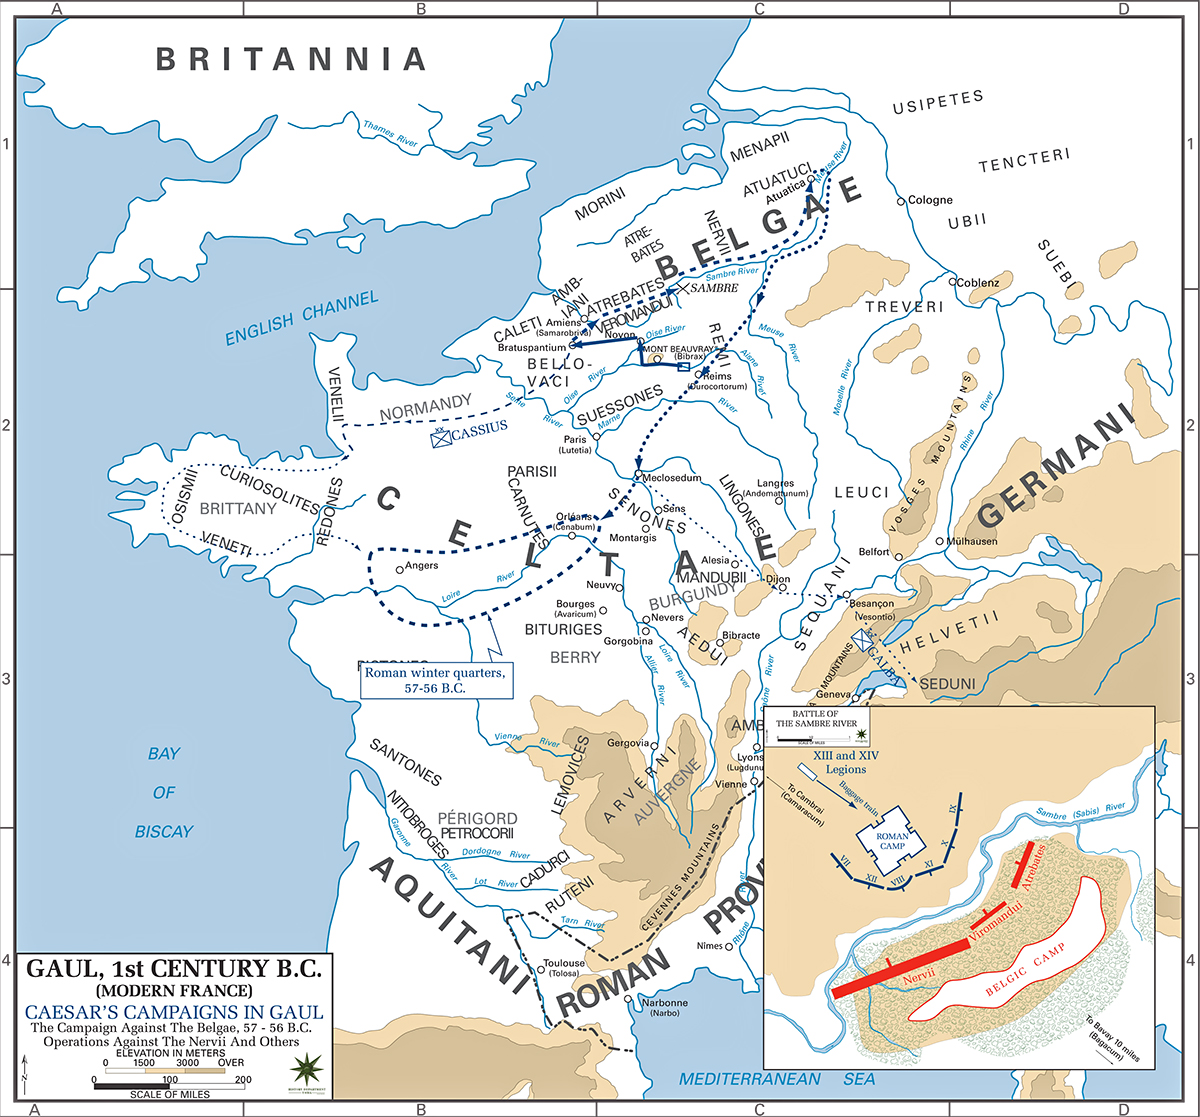 Map of Caesar's Campaign Against the Belgae 57 / 56 BC - Operations Against the Nervii and Others